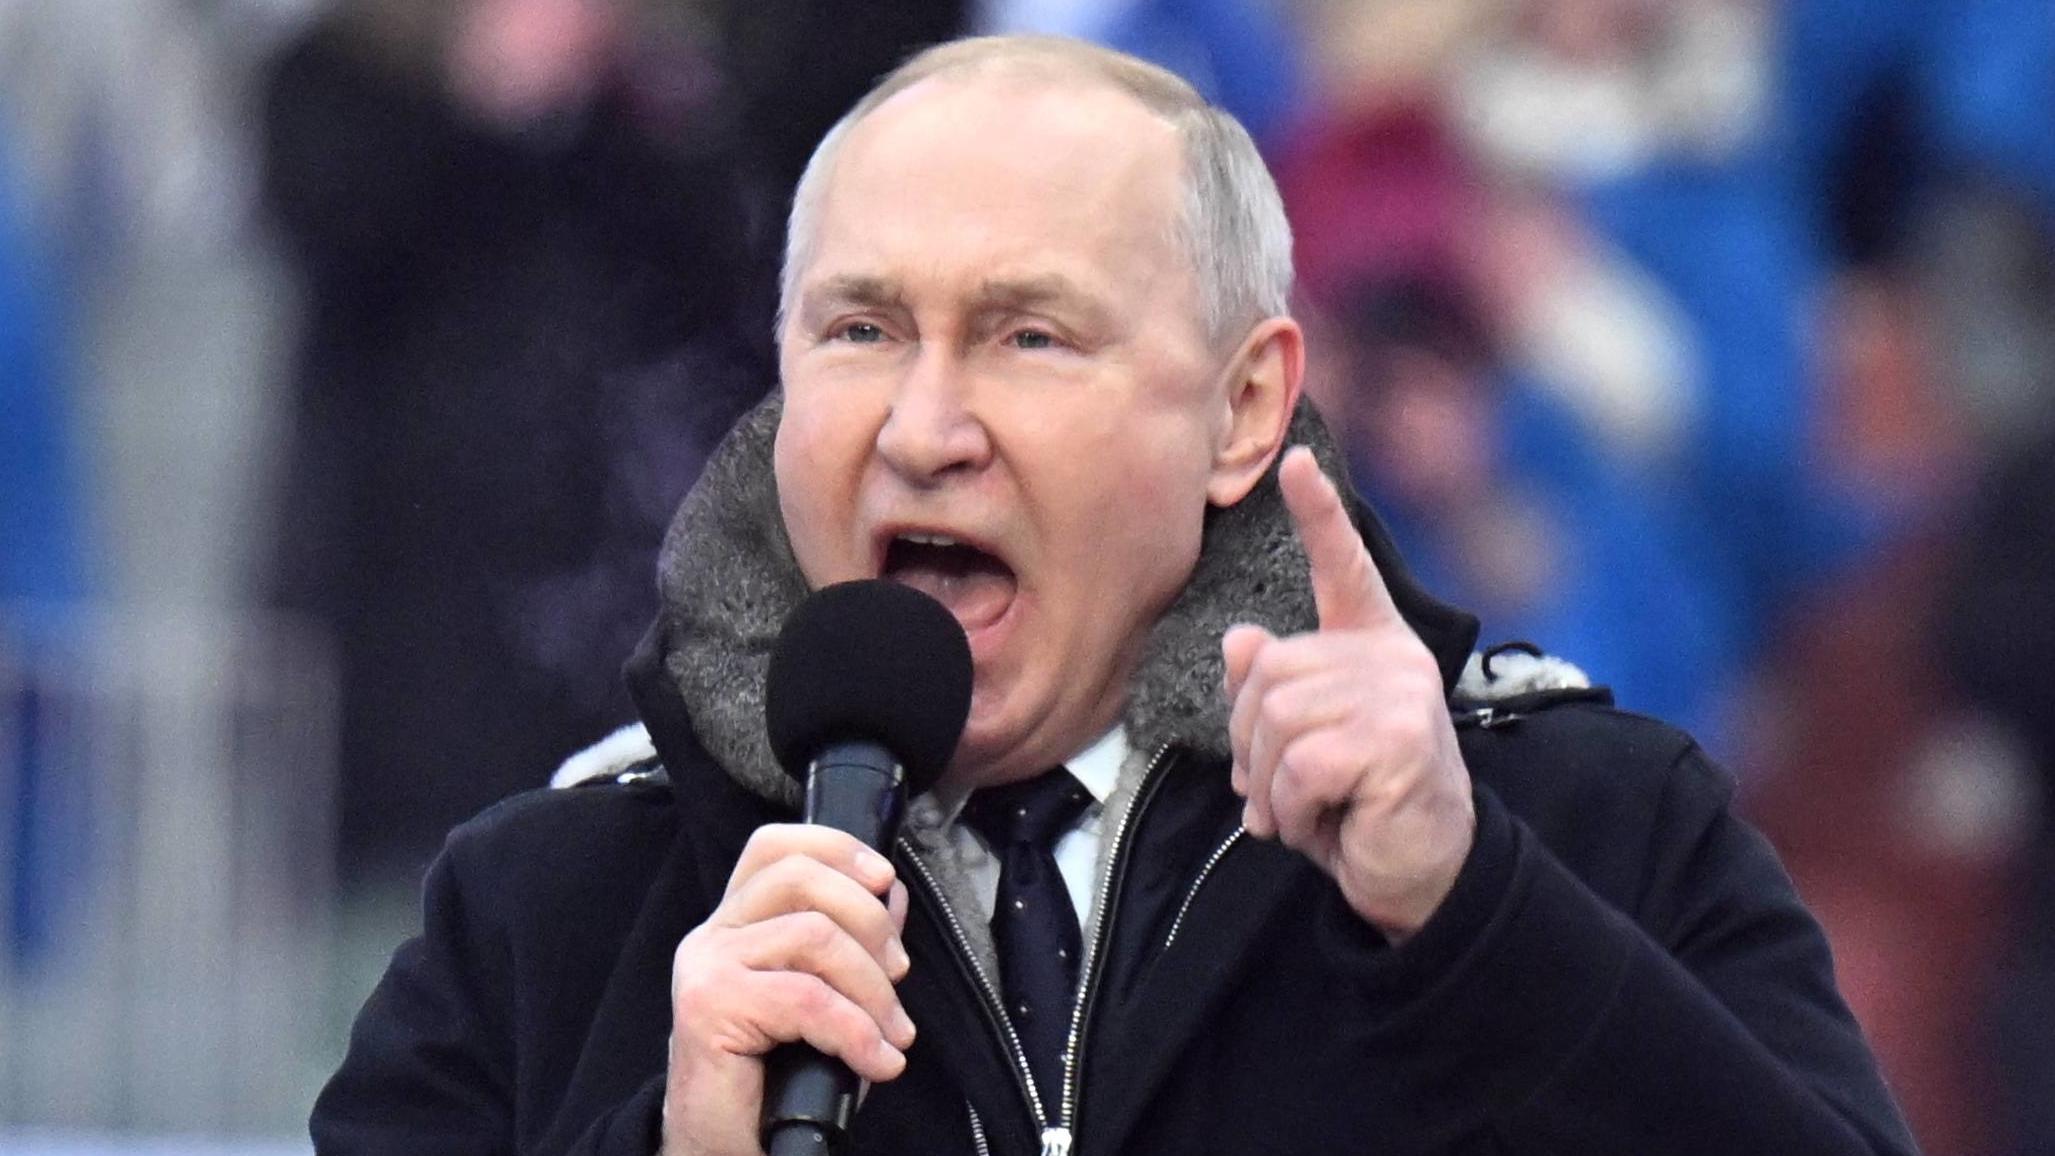 Russia Putin Military Support Concert 8375898 22.02.2023 Russian President Vladimir Putin attends a concert dedicated to Russian servicemen taking part in the military operation in Ukraine on the eve of Defender of Fatherland Day at the Luzhniki stad